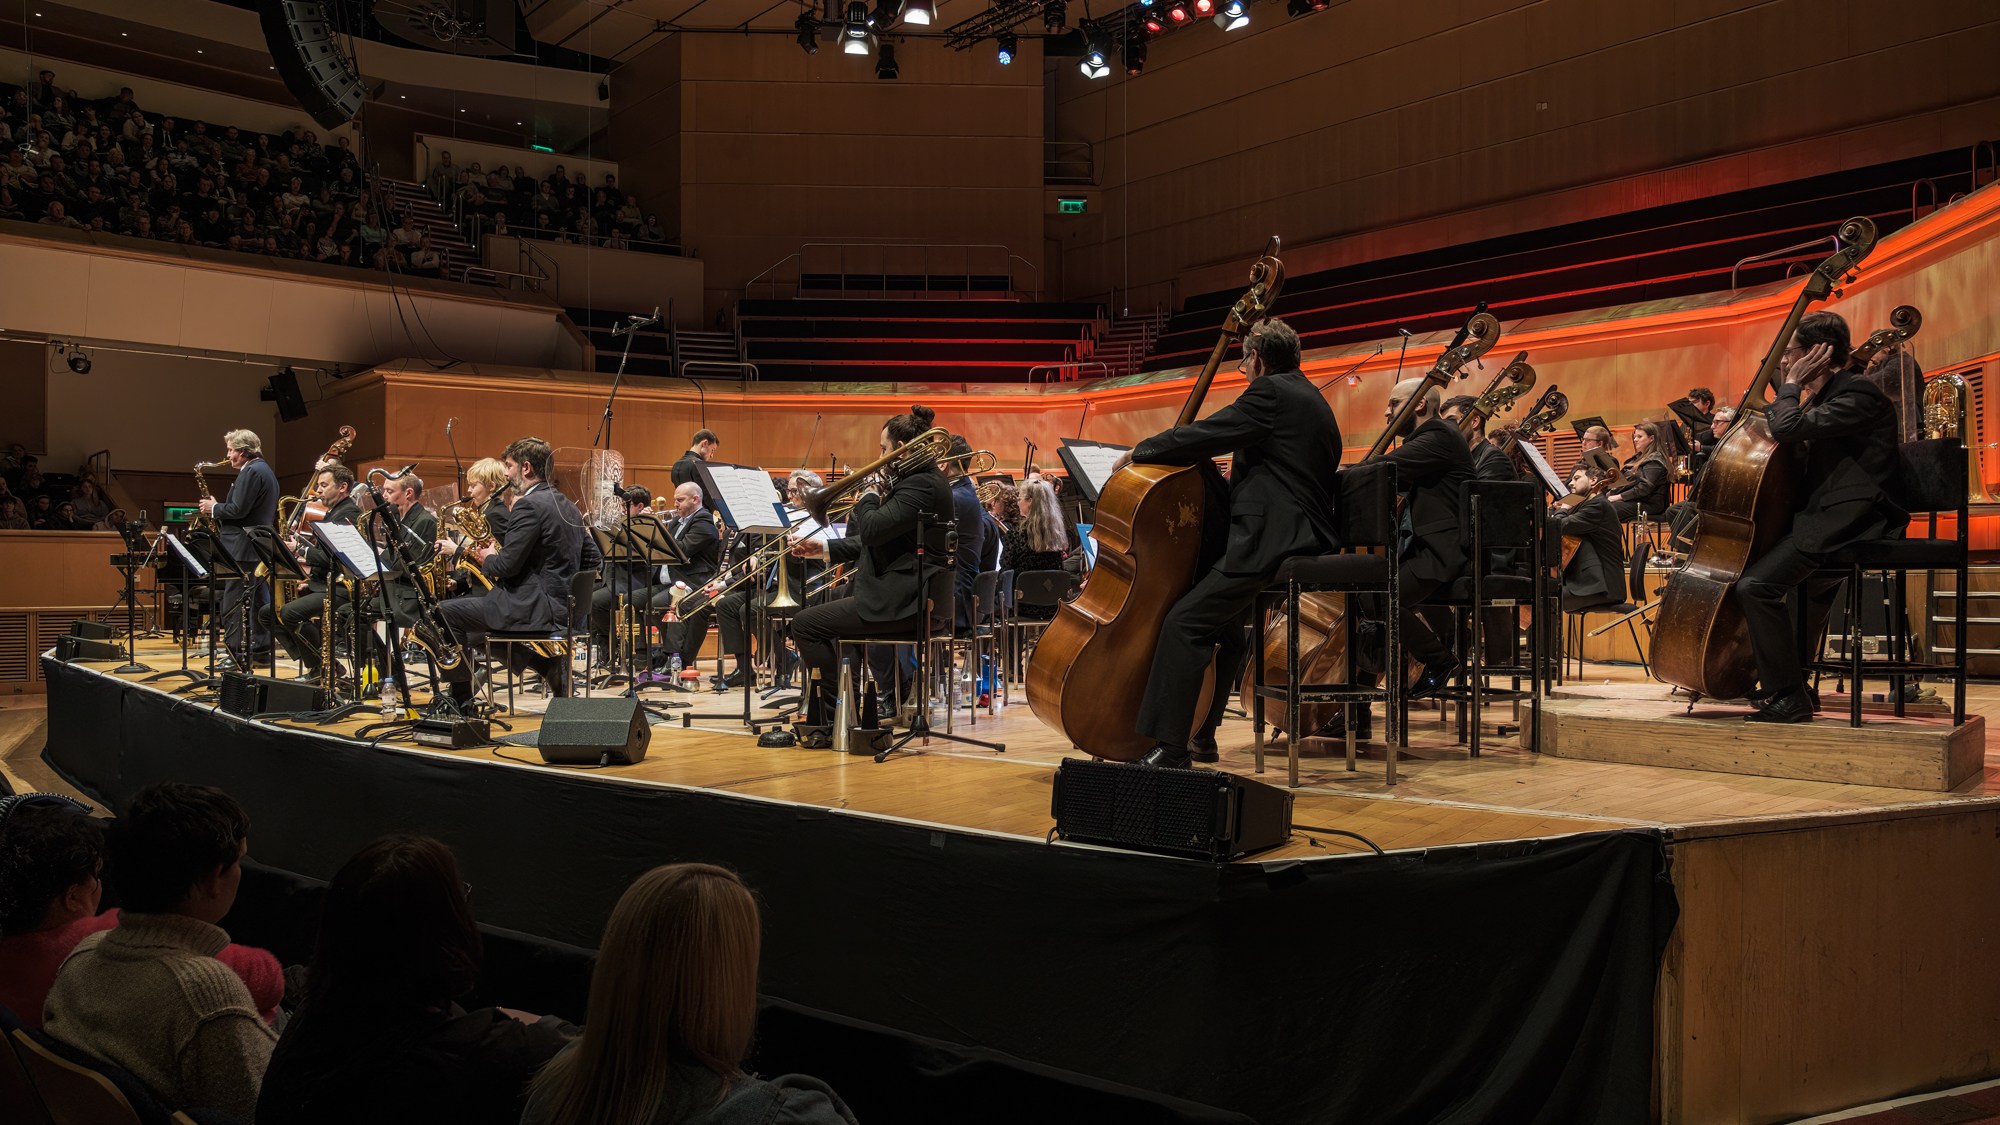 Both orchestras were at their best when they were playing separately